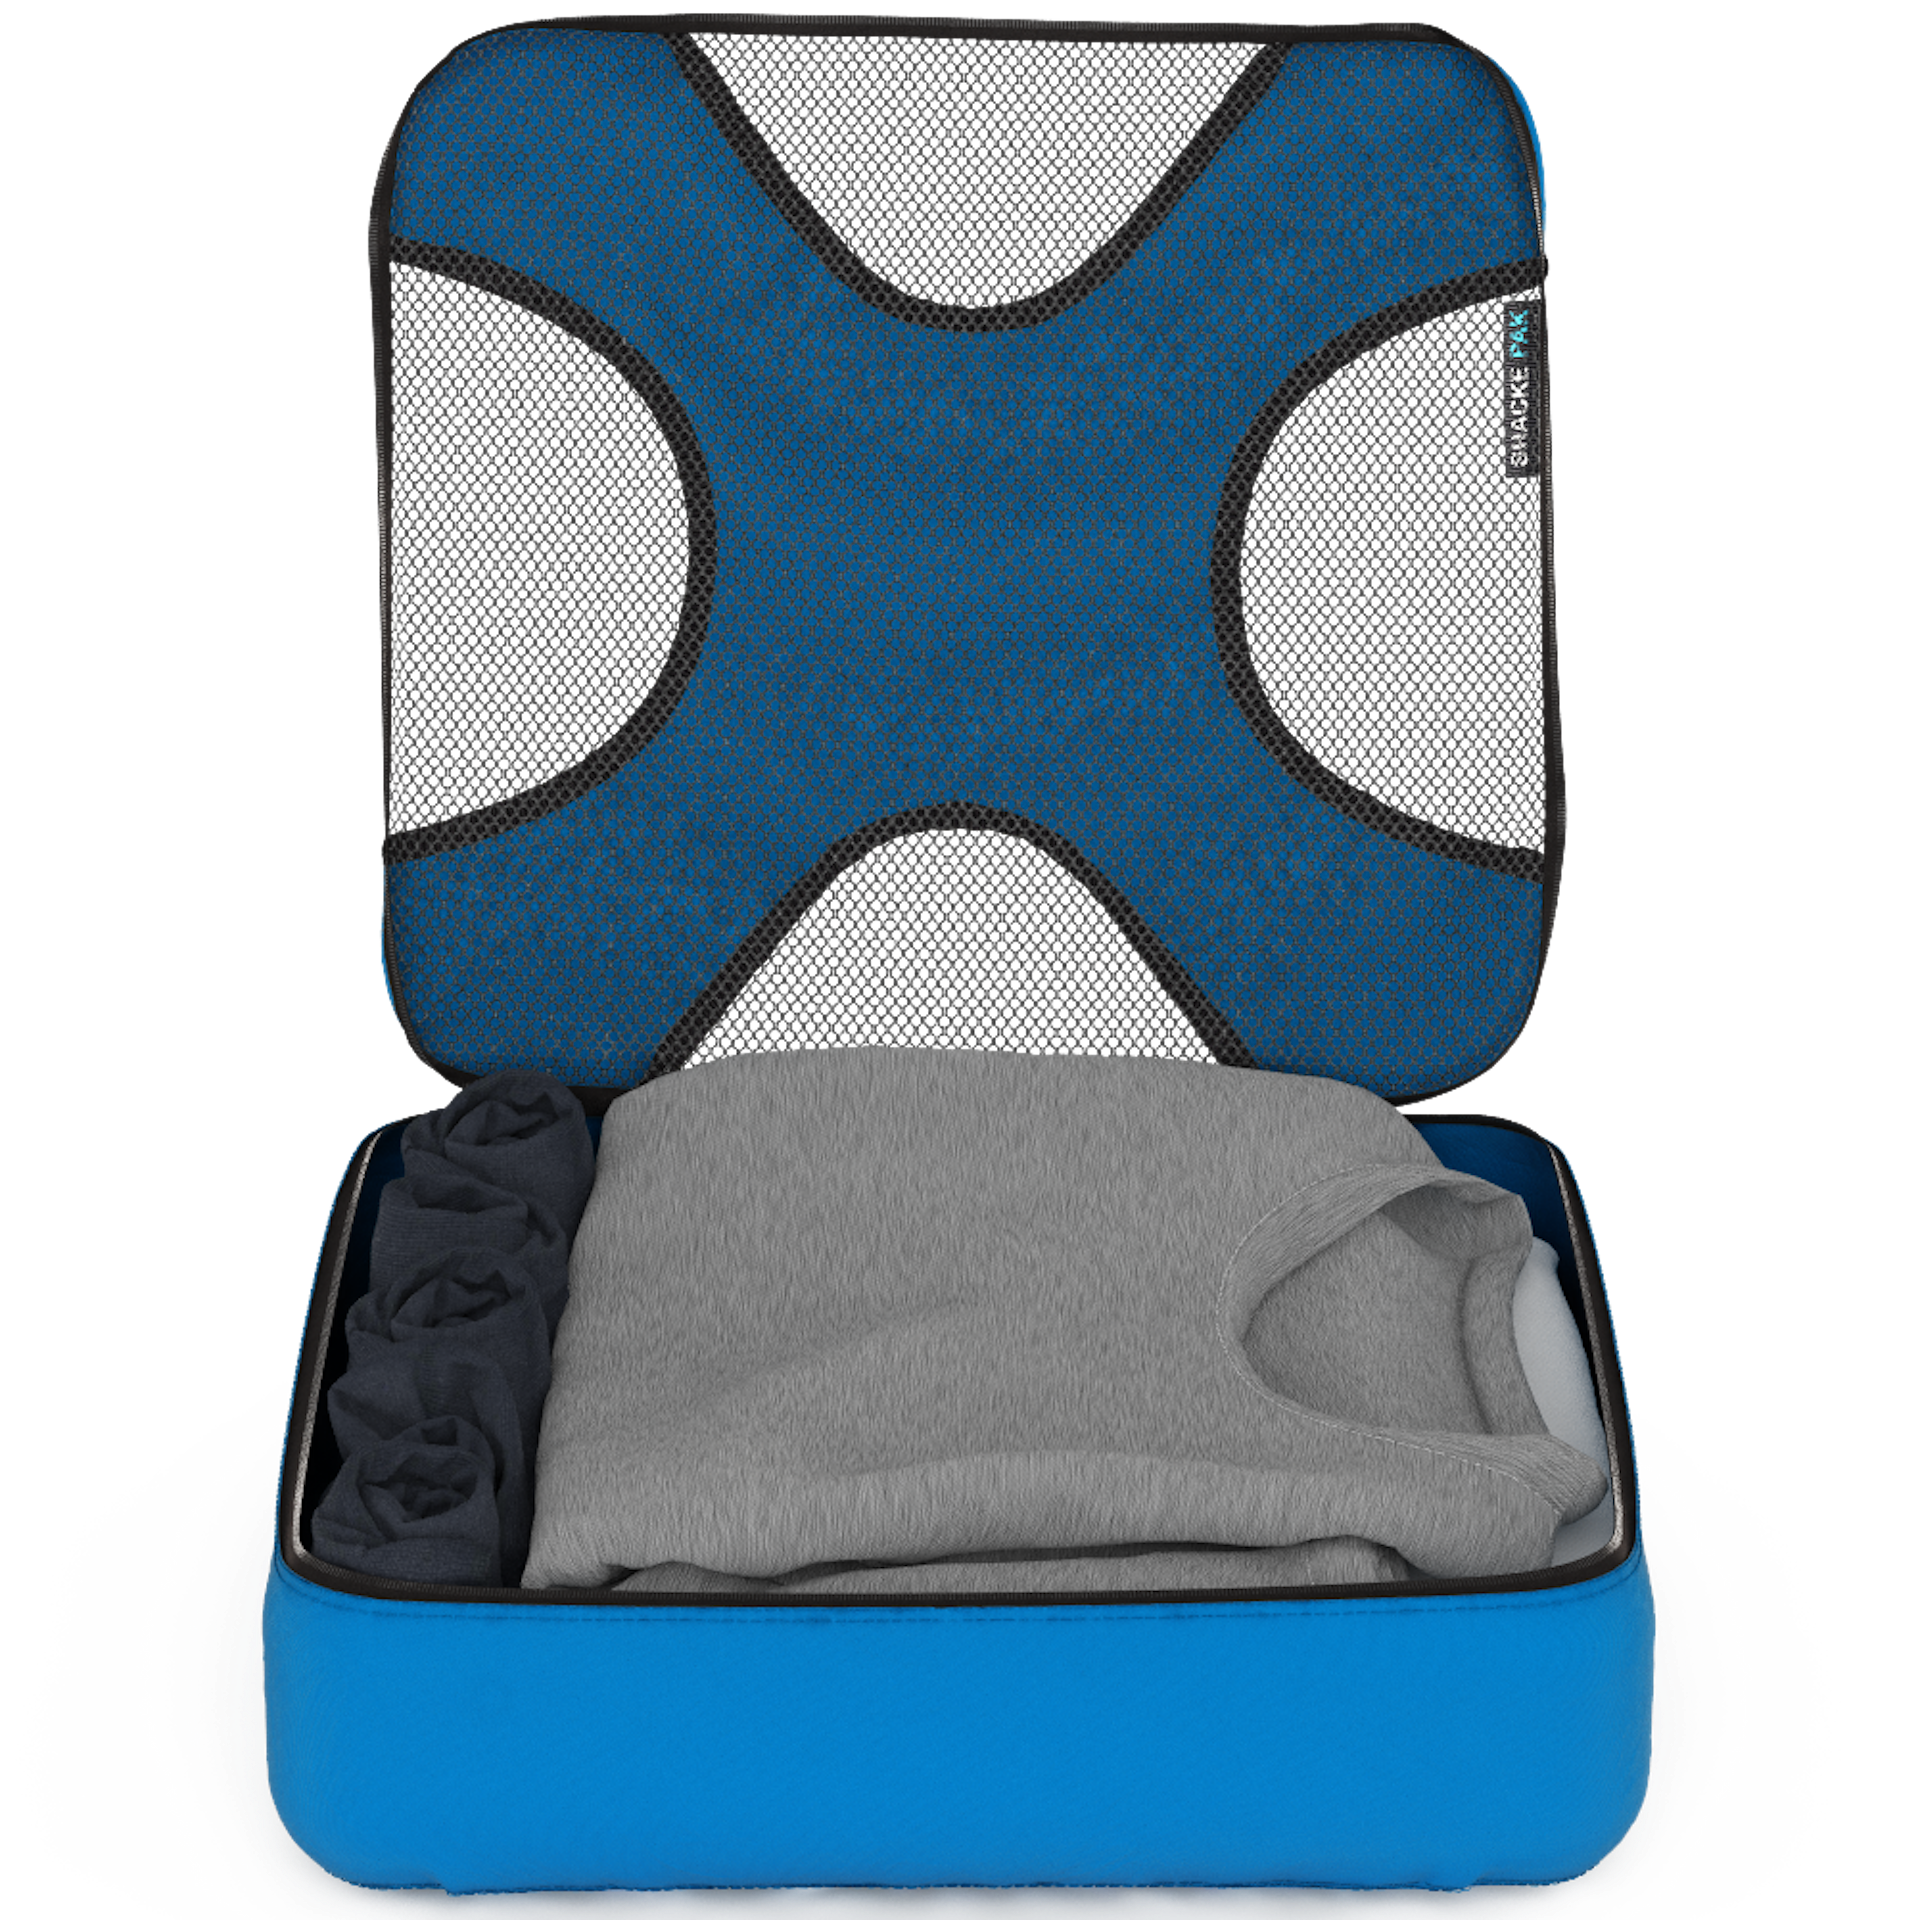 A blue packing cube is shown with its mesh lid open, distinguished by a large blue x-shaped panel. Inside are folded clothes in neutral colors, including a grey sweater.